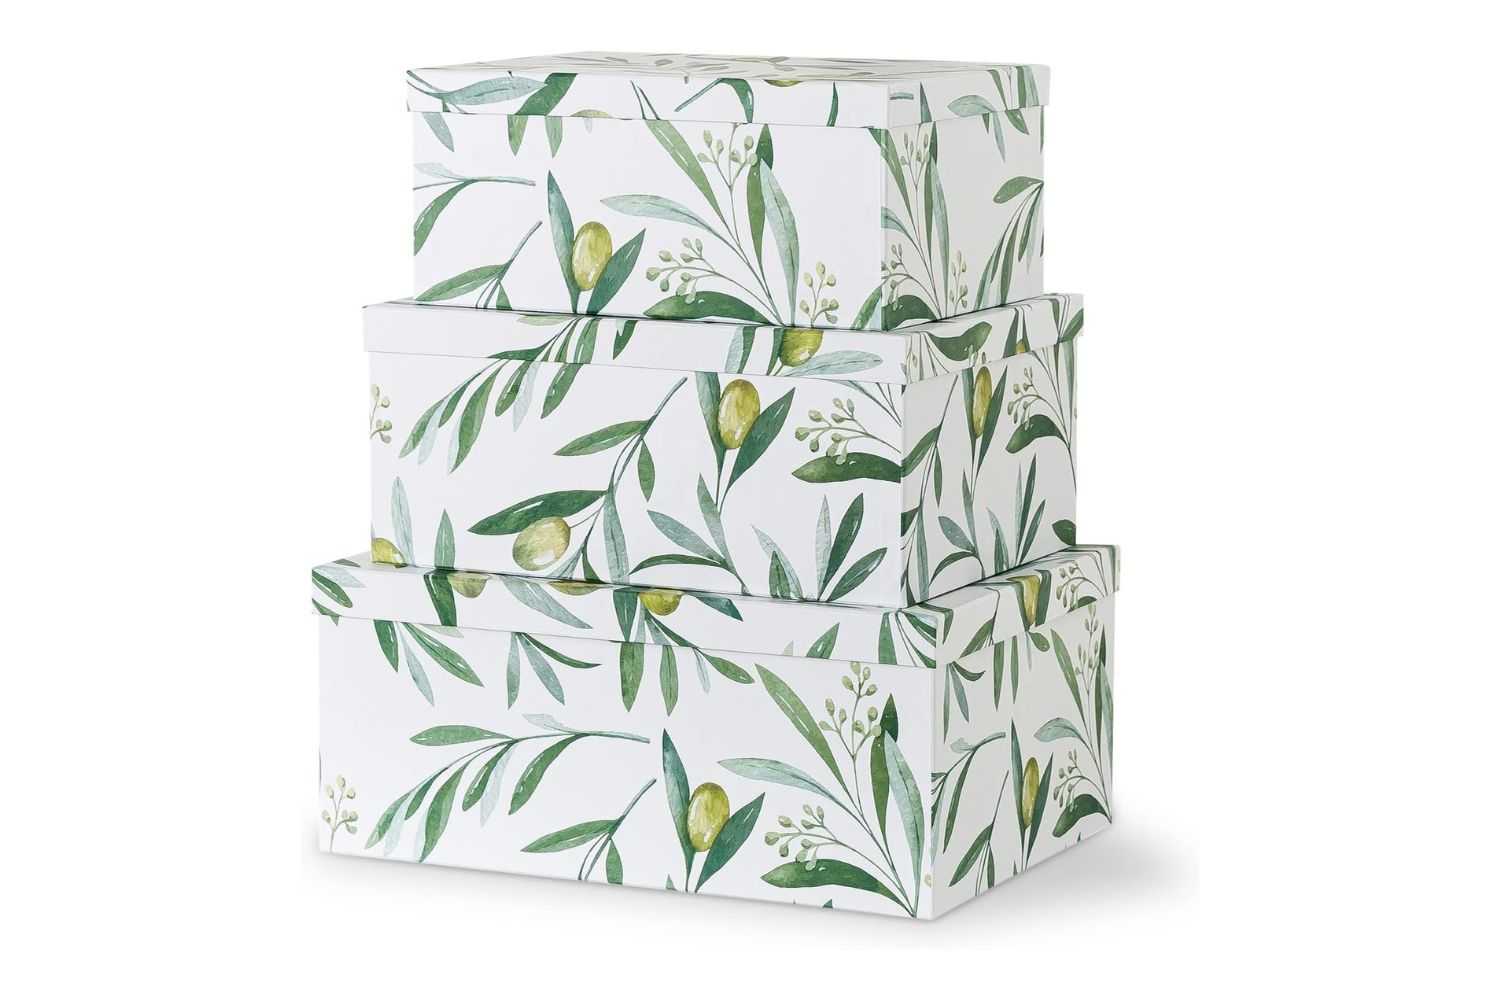 Soul & Lane Olive Branches Cardboard Boxes